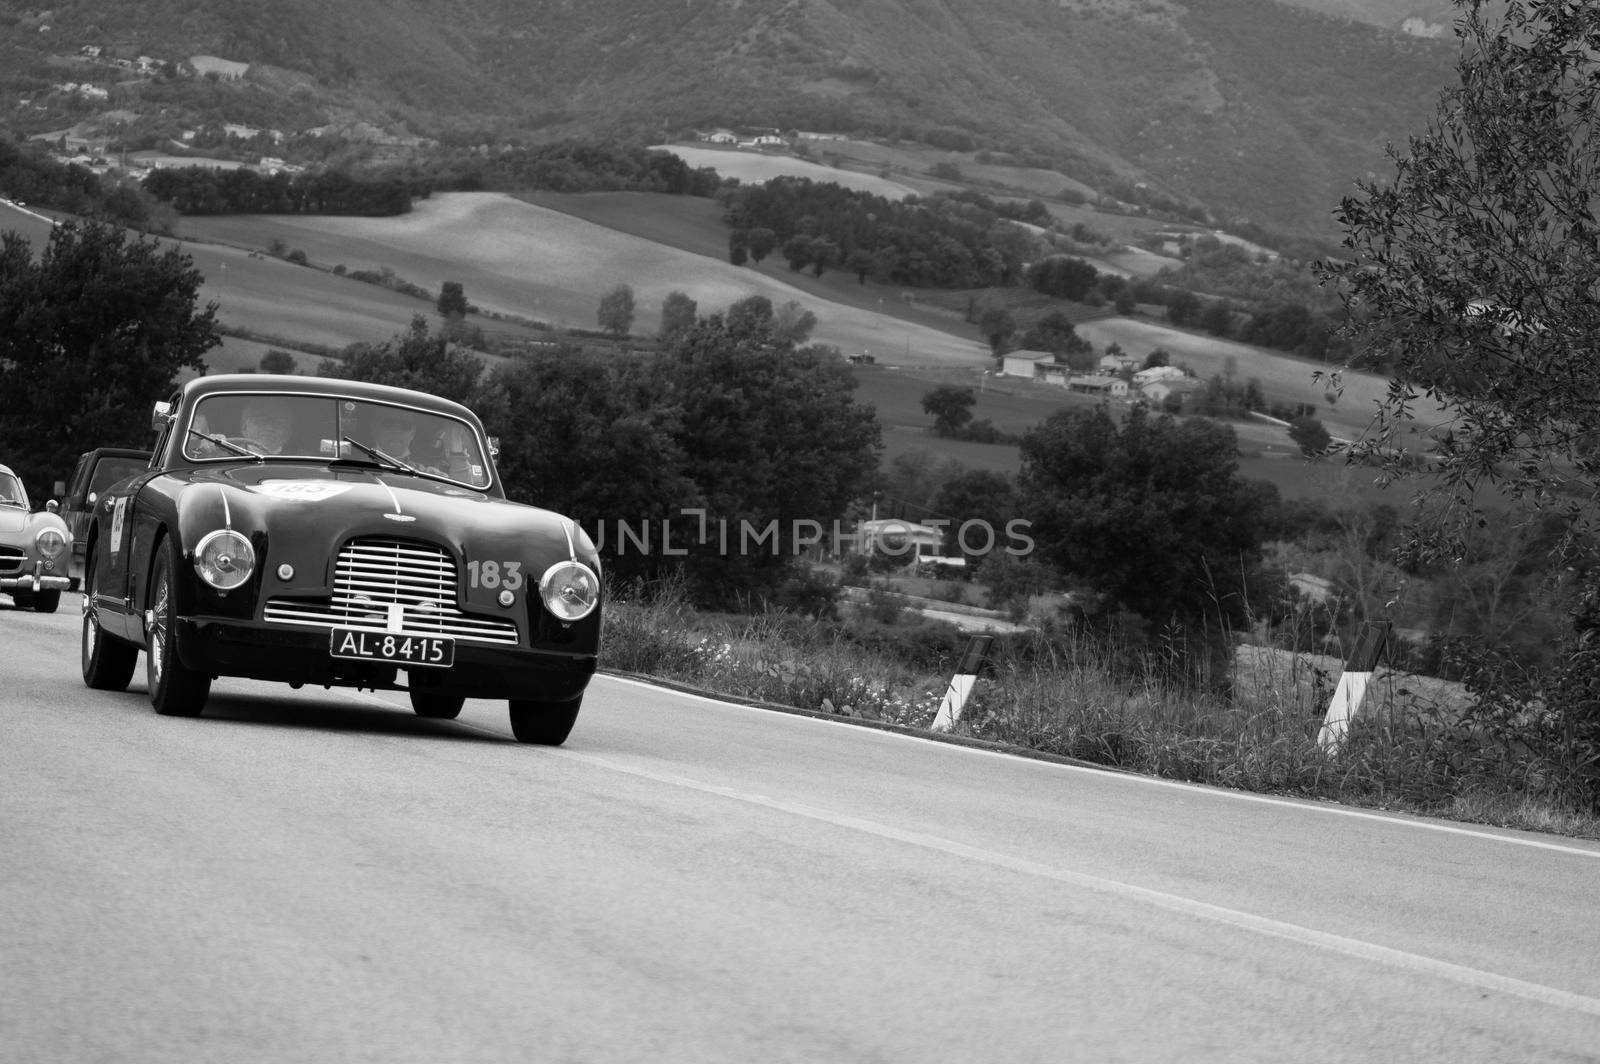 CAGLI , ITALY - OTT 24 - 2020 : ASTON MARTIN DB 2 on an old racing car in rally Mille Miglia 2020 the famous italian historical race (1927-1957)